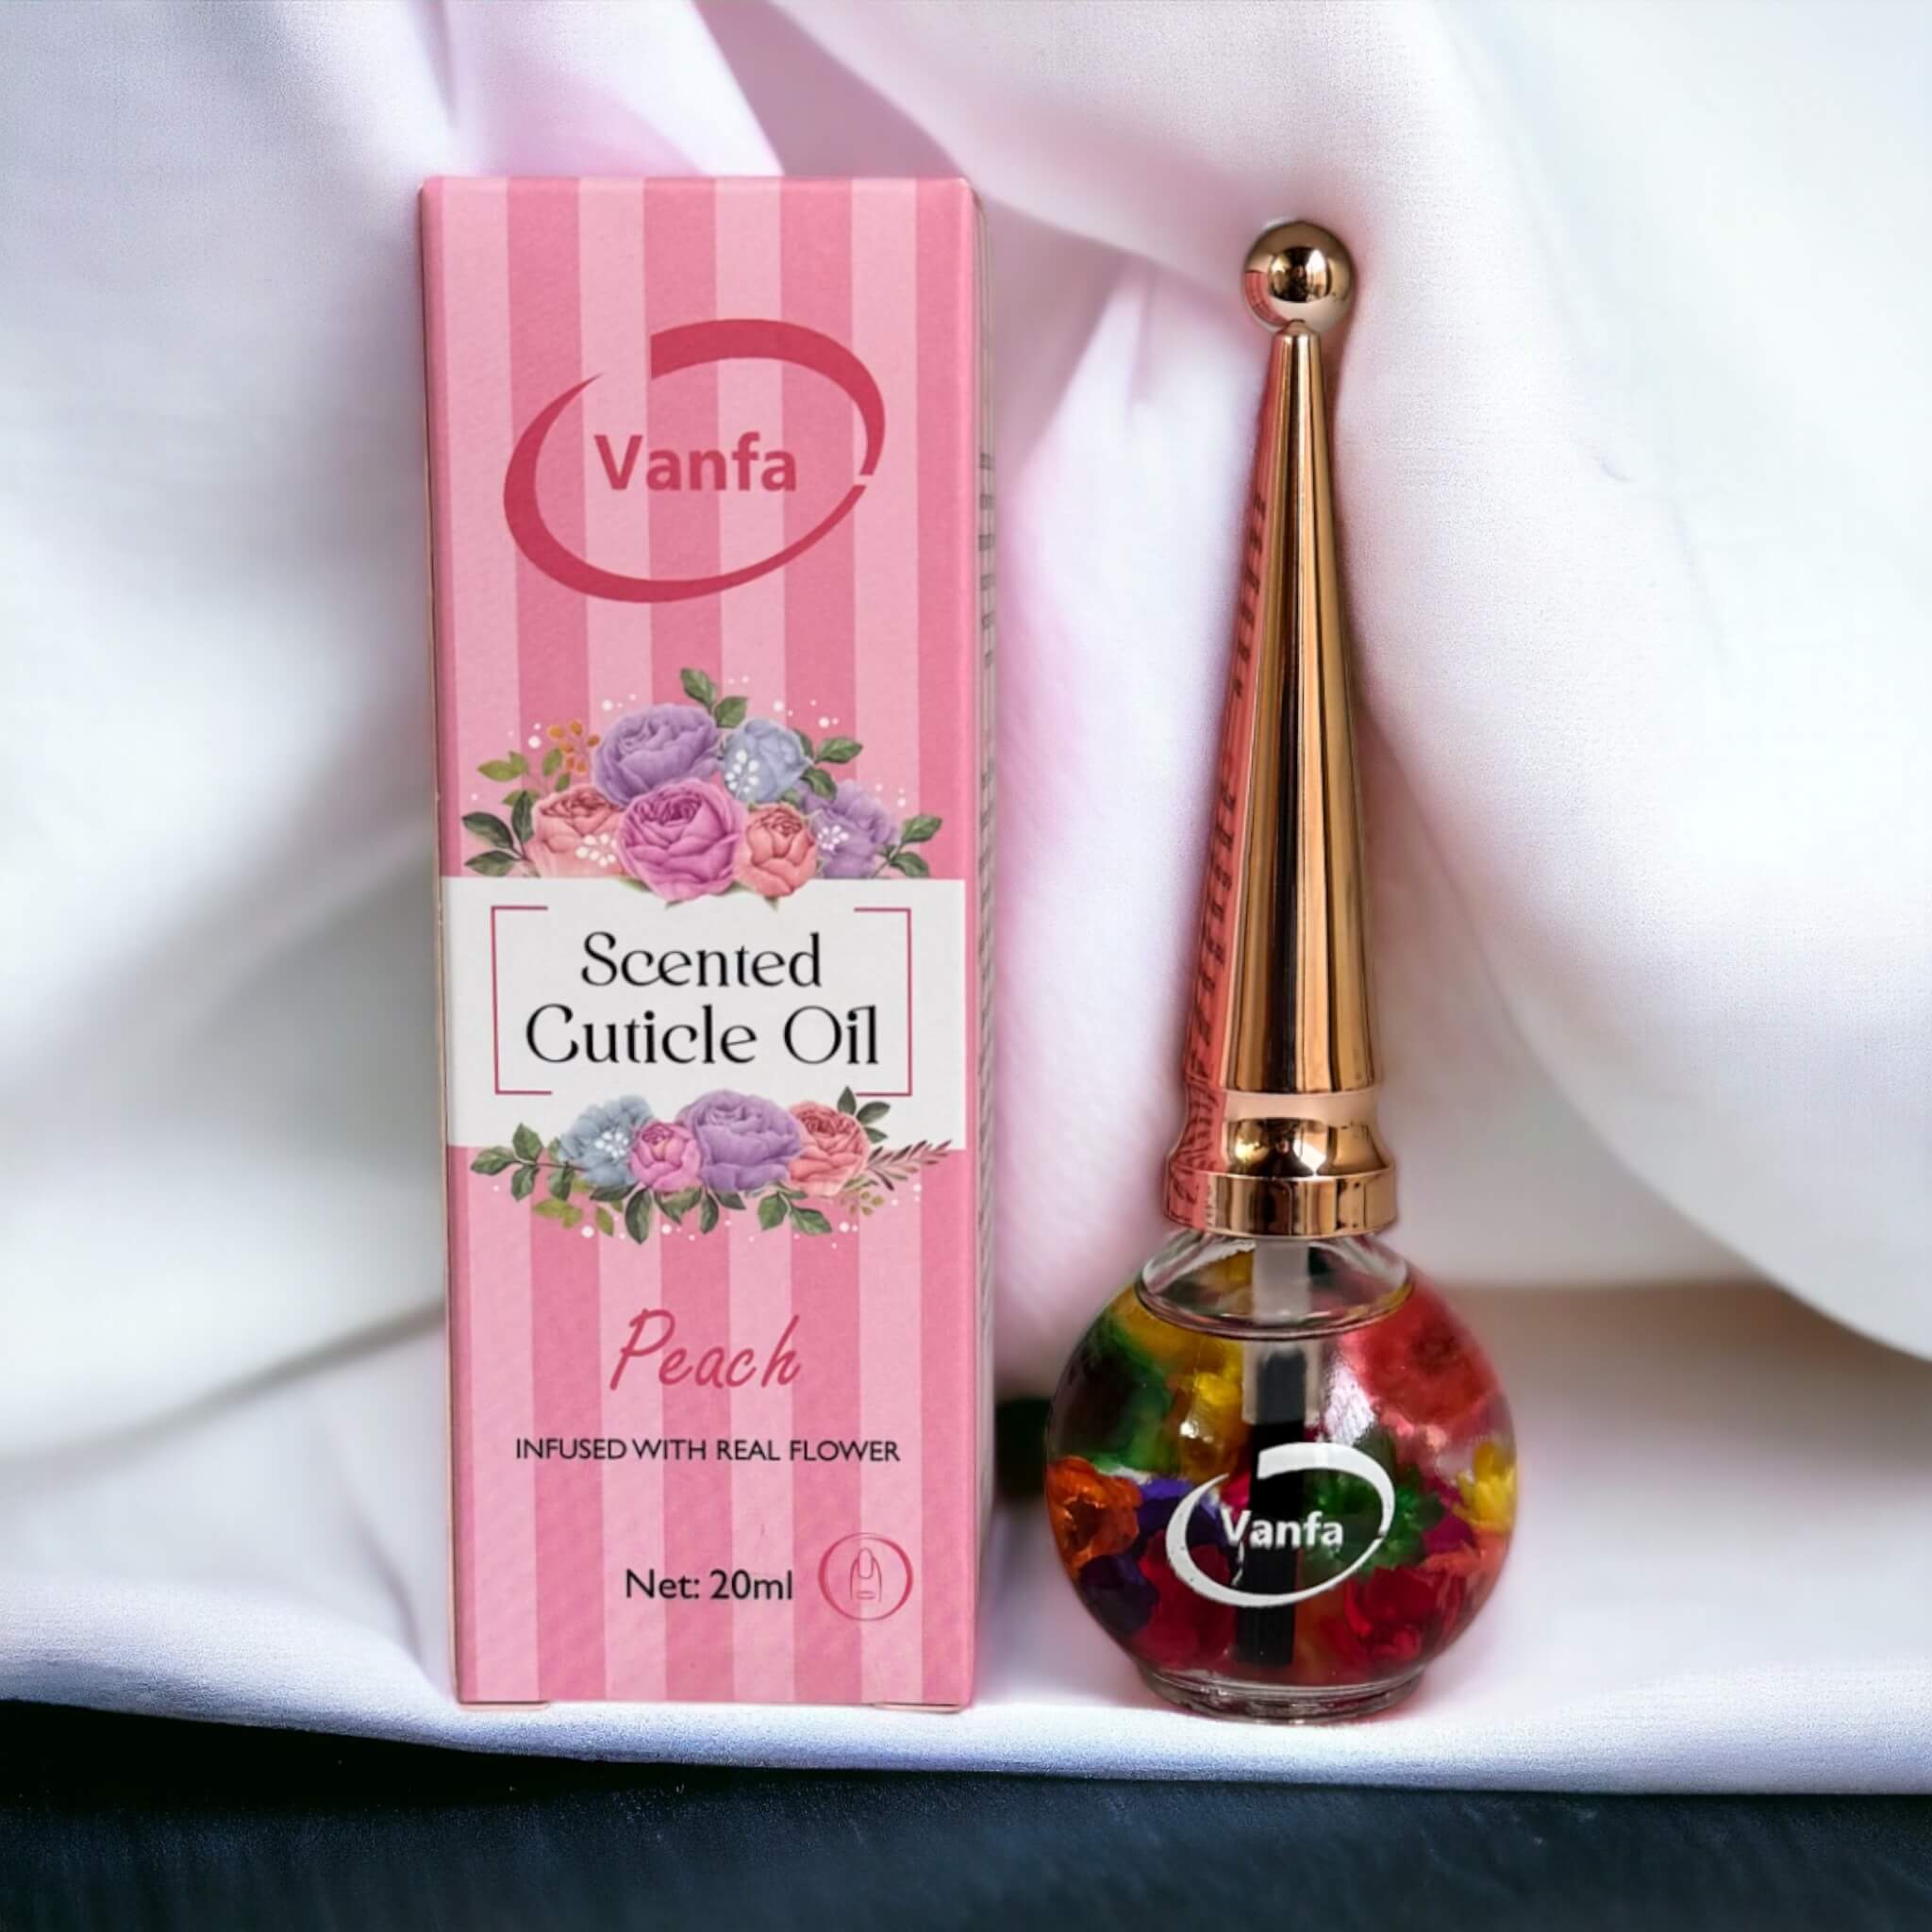 VANFA Cuticle Oil infused with real flower 0.42 Oz - Peach